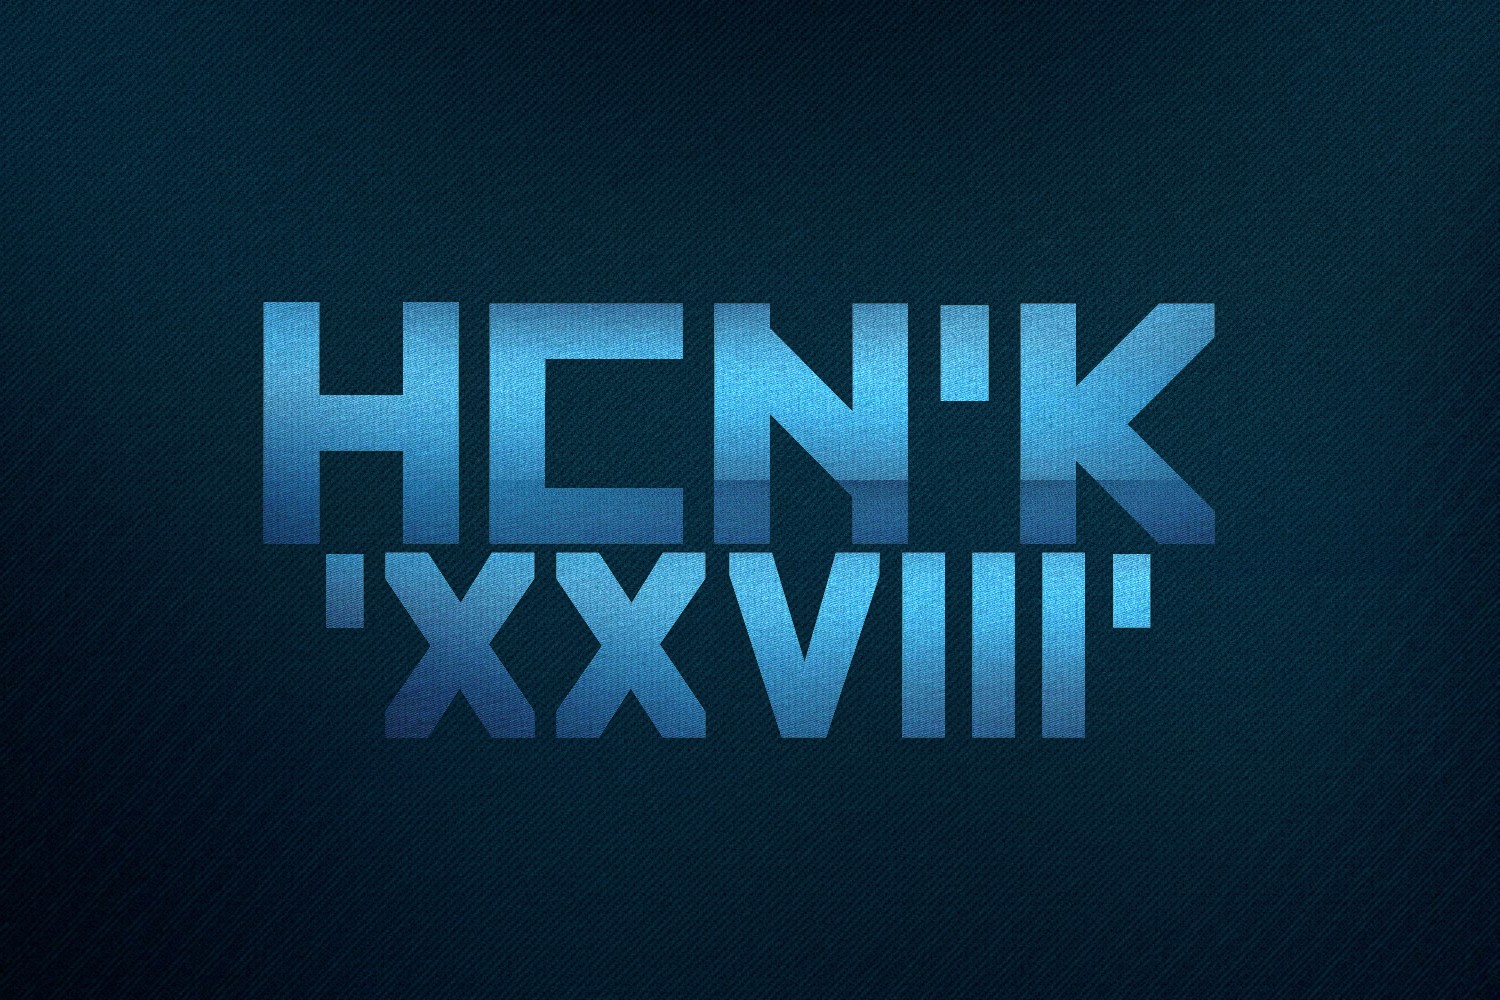 Counter Strike: Global Offensive, CS:GO Team, Video games, Spes salutis, HCNK CS:GO, Blue, Typography, Blue background, Simple background Wallpaper